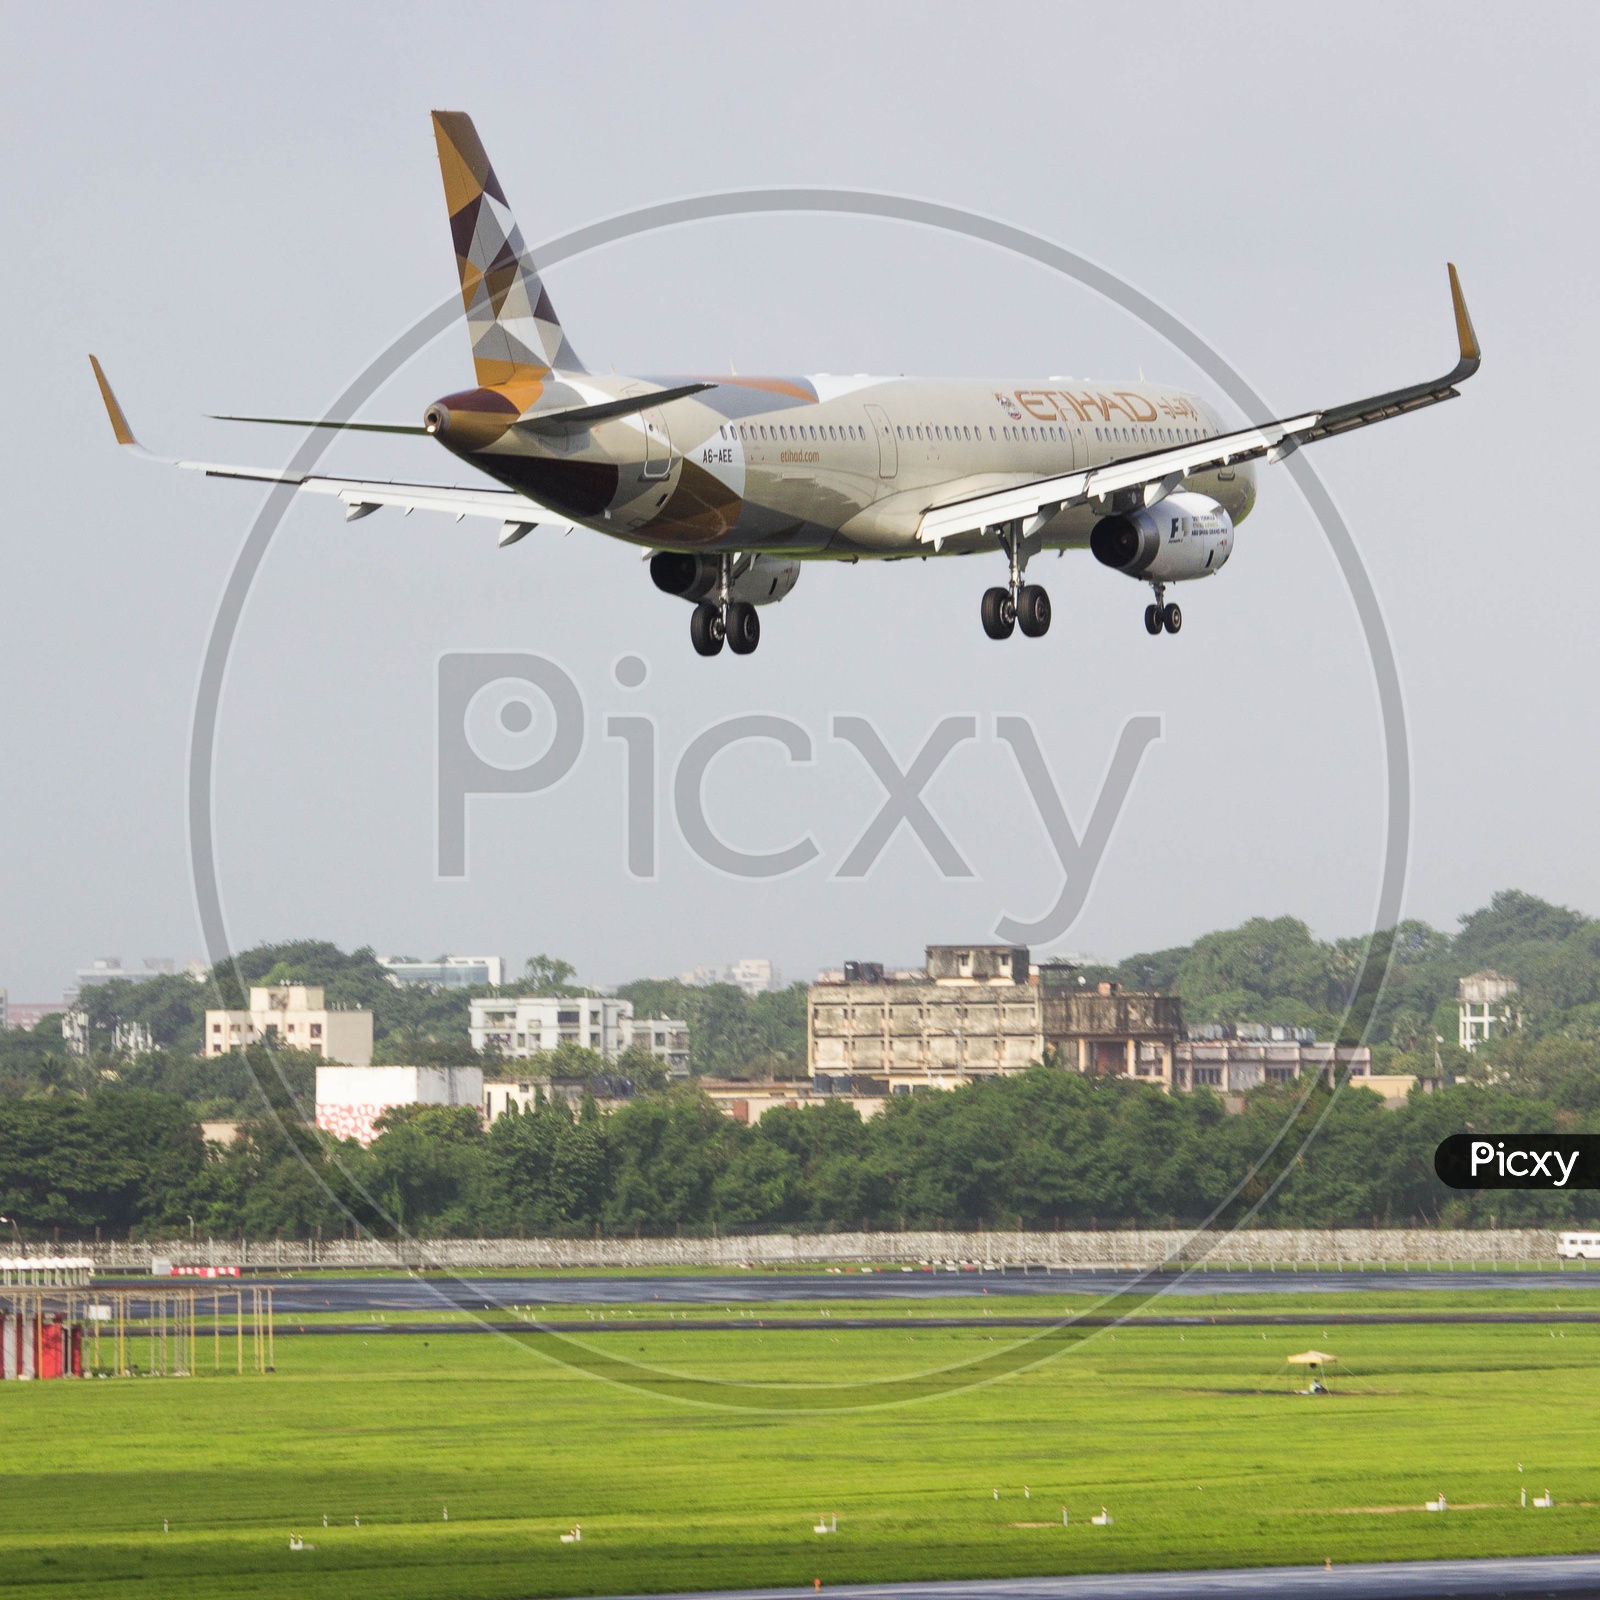 Etihad airways A321 flaring over runway for its touchdown.